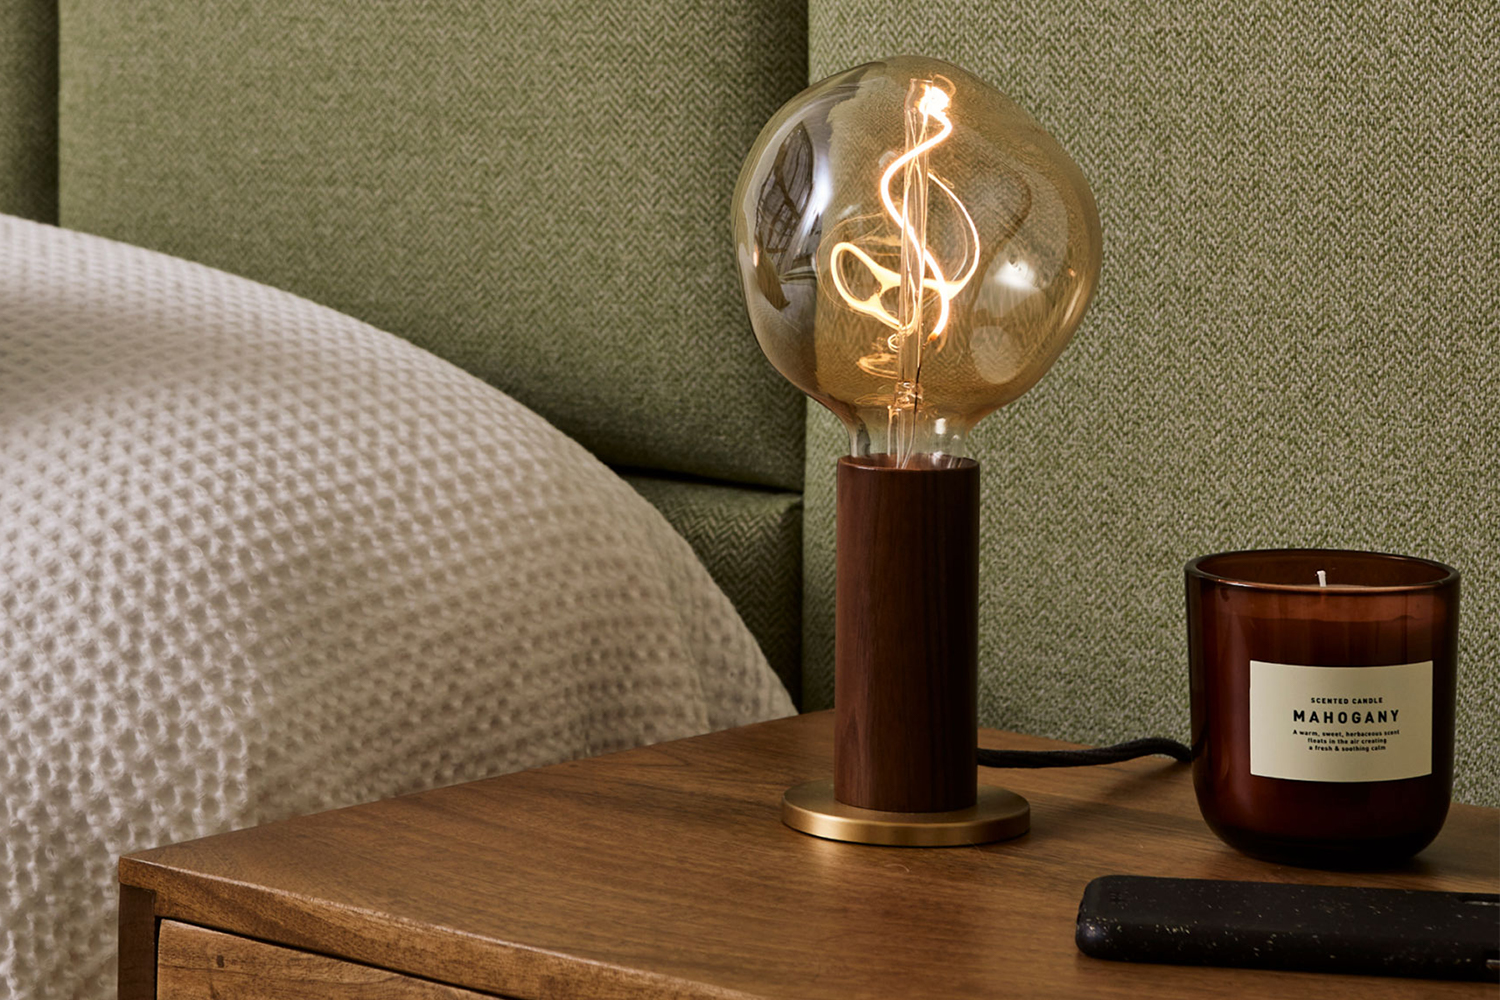 The Knuckle Table Lamp from Tala, a London-based lighting design company, that's being sold as part of DTC furniture company Burrow's new Bedroom collection, which launched in February 2022